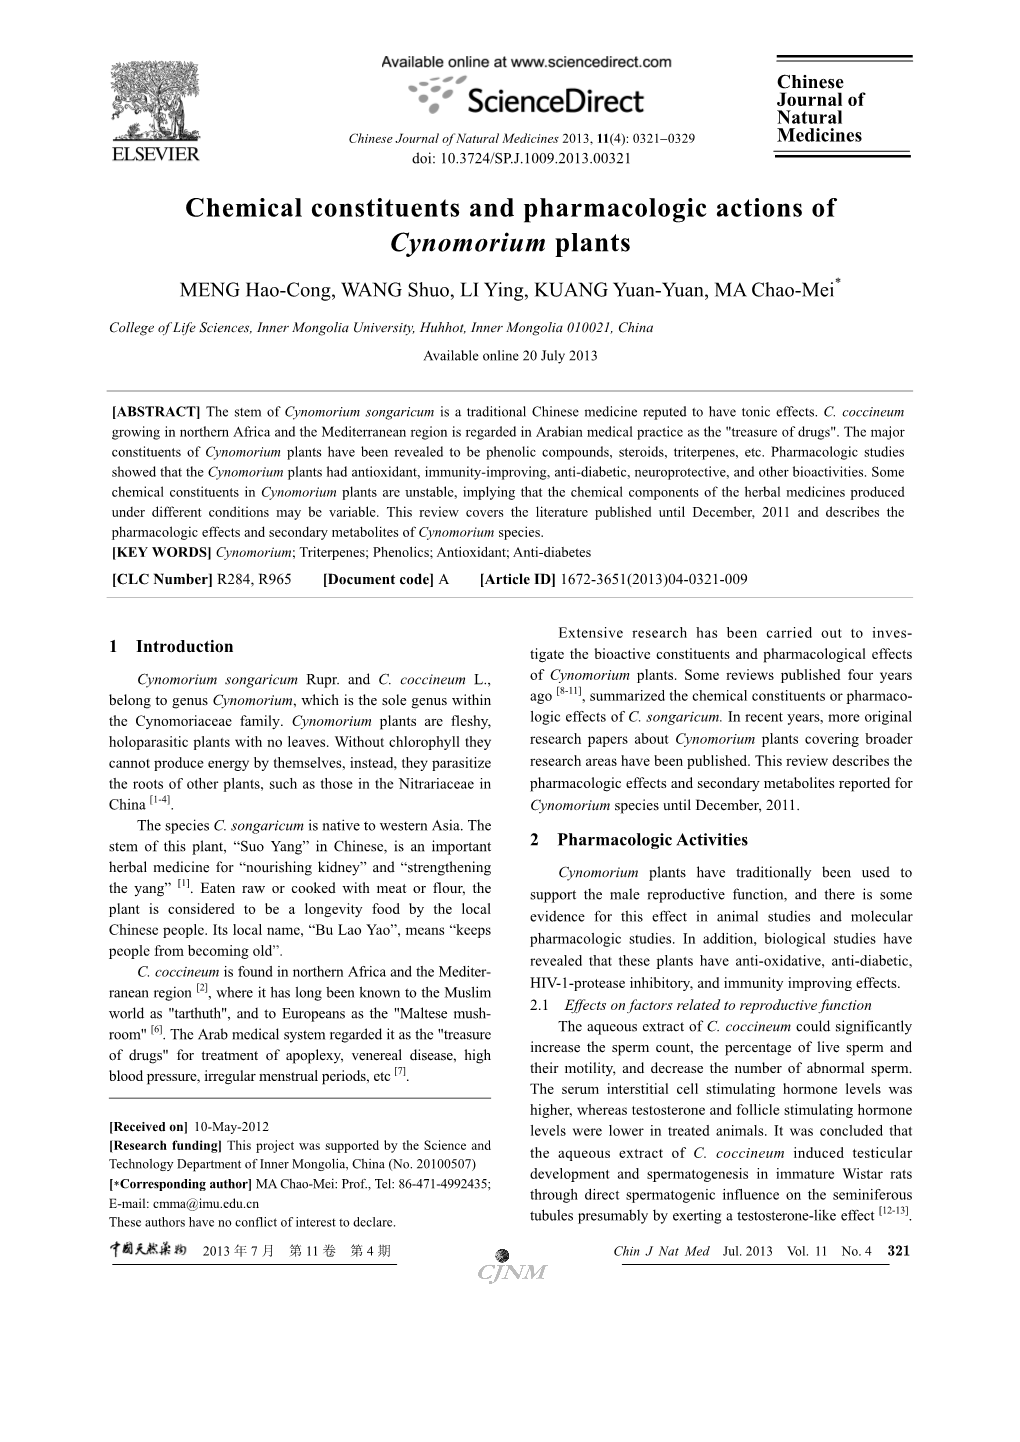 Chemical Constituents and Pharmacologic Actions of Cynomorium Plants